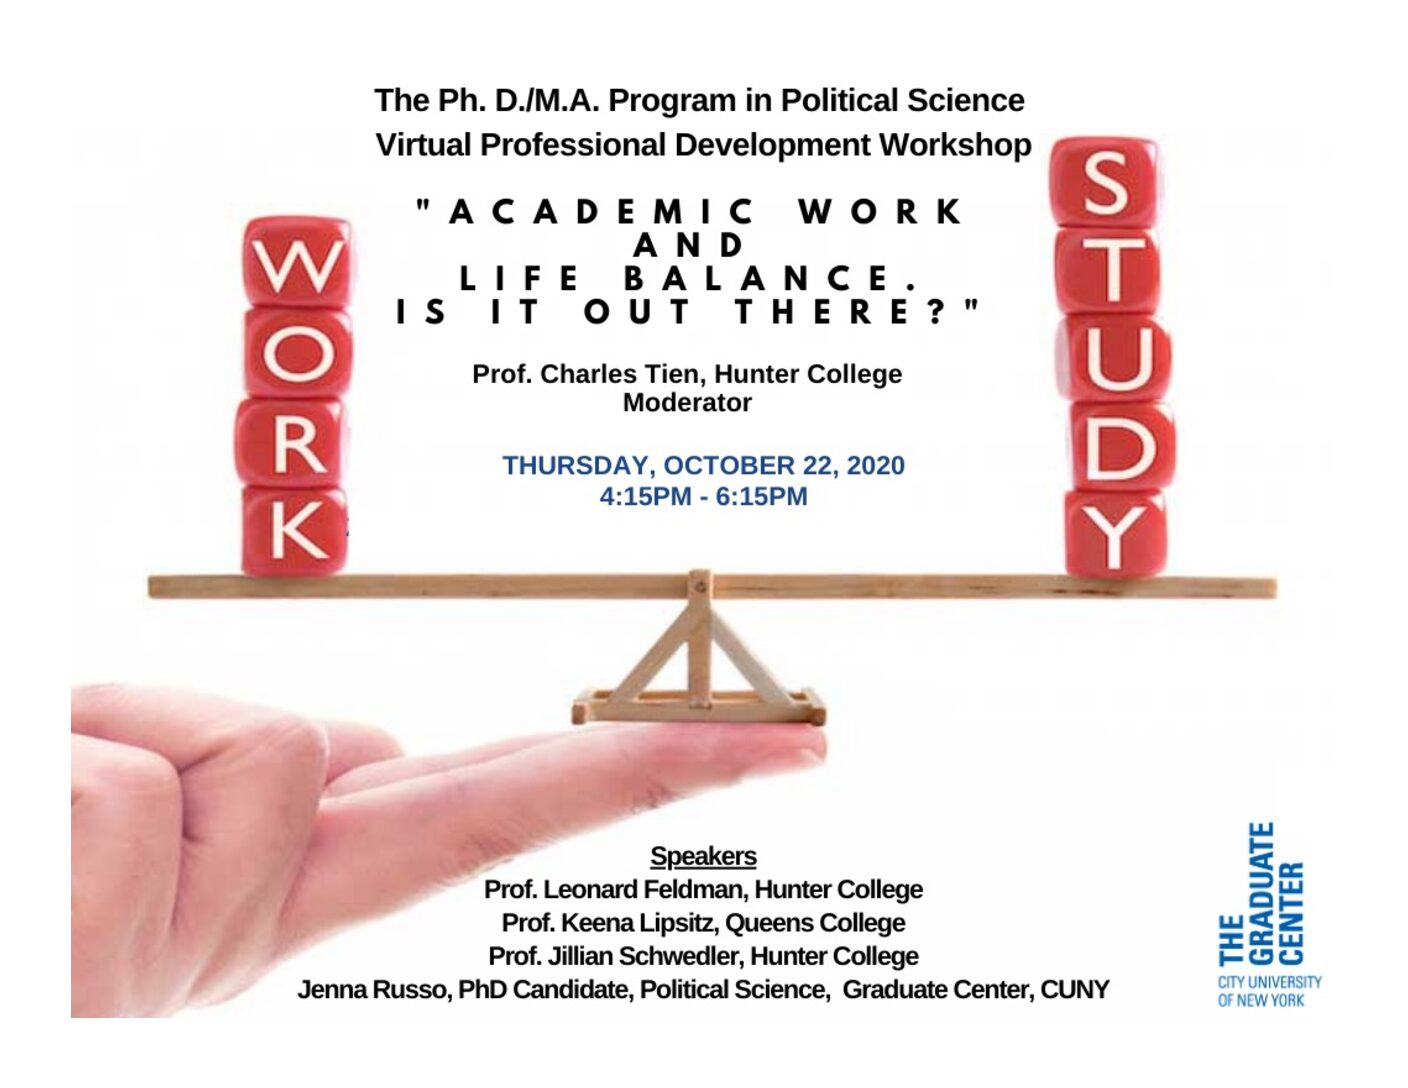 Professional Development Workshop: "Academic Work and Life Balance.  Is It Out There?" Thursday, October 22, 4:15PM